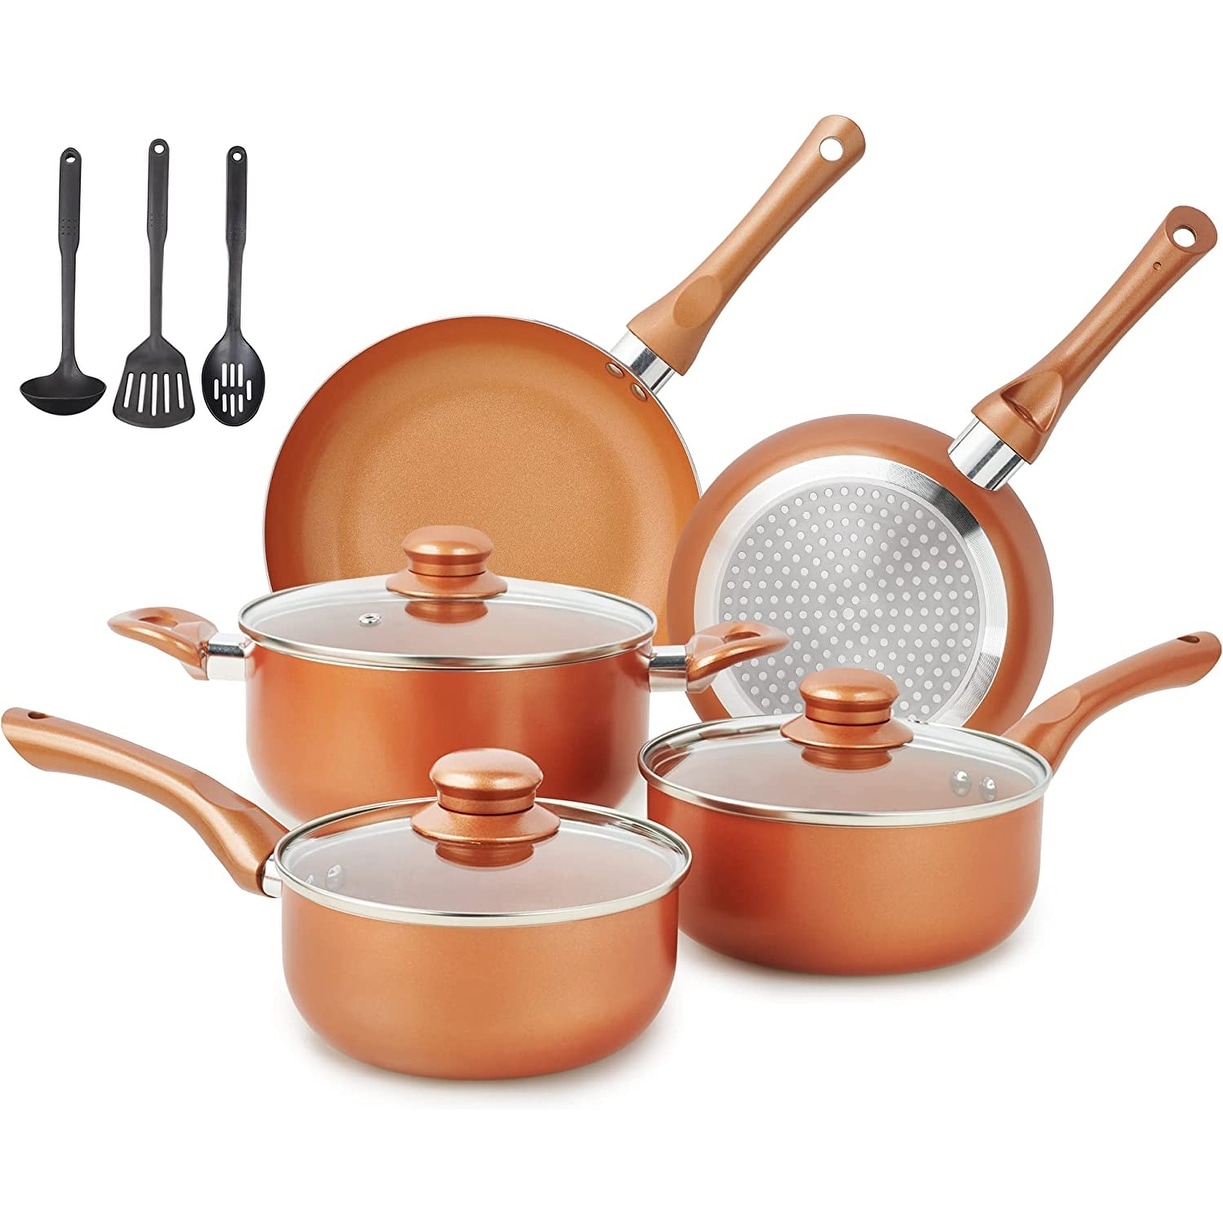 https://ak1.ostkcdn.com/images/products/is/images/direct/f9cb3e894b5aecbedea95485aabb08948b735659/Pots-and-Pans-Set-Ultra-Nonstick%2C-Pre-Installed-11pcs-Cookware-Set-Copper-with-Ceramic-Coating%2C-Stay-cool-handle.jpg